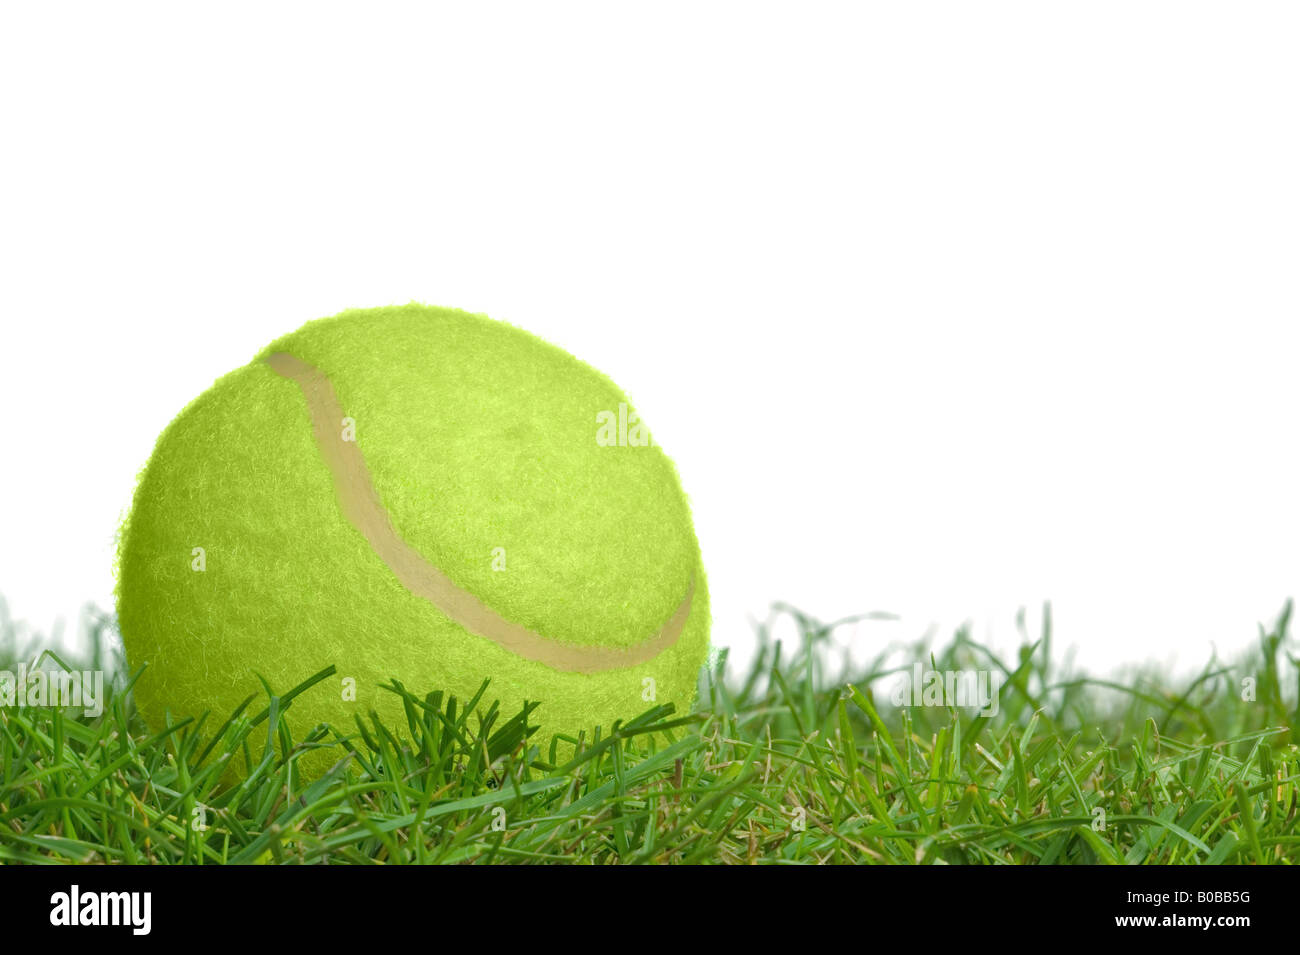 Surface level shot of a yellow tennis ball on real grass Stock Photo